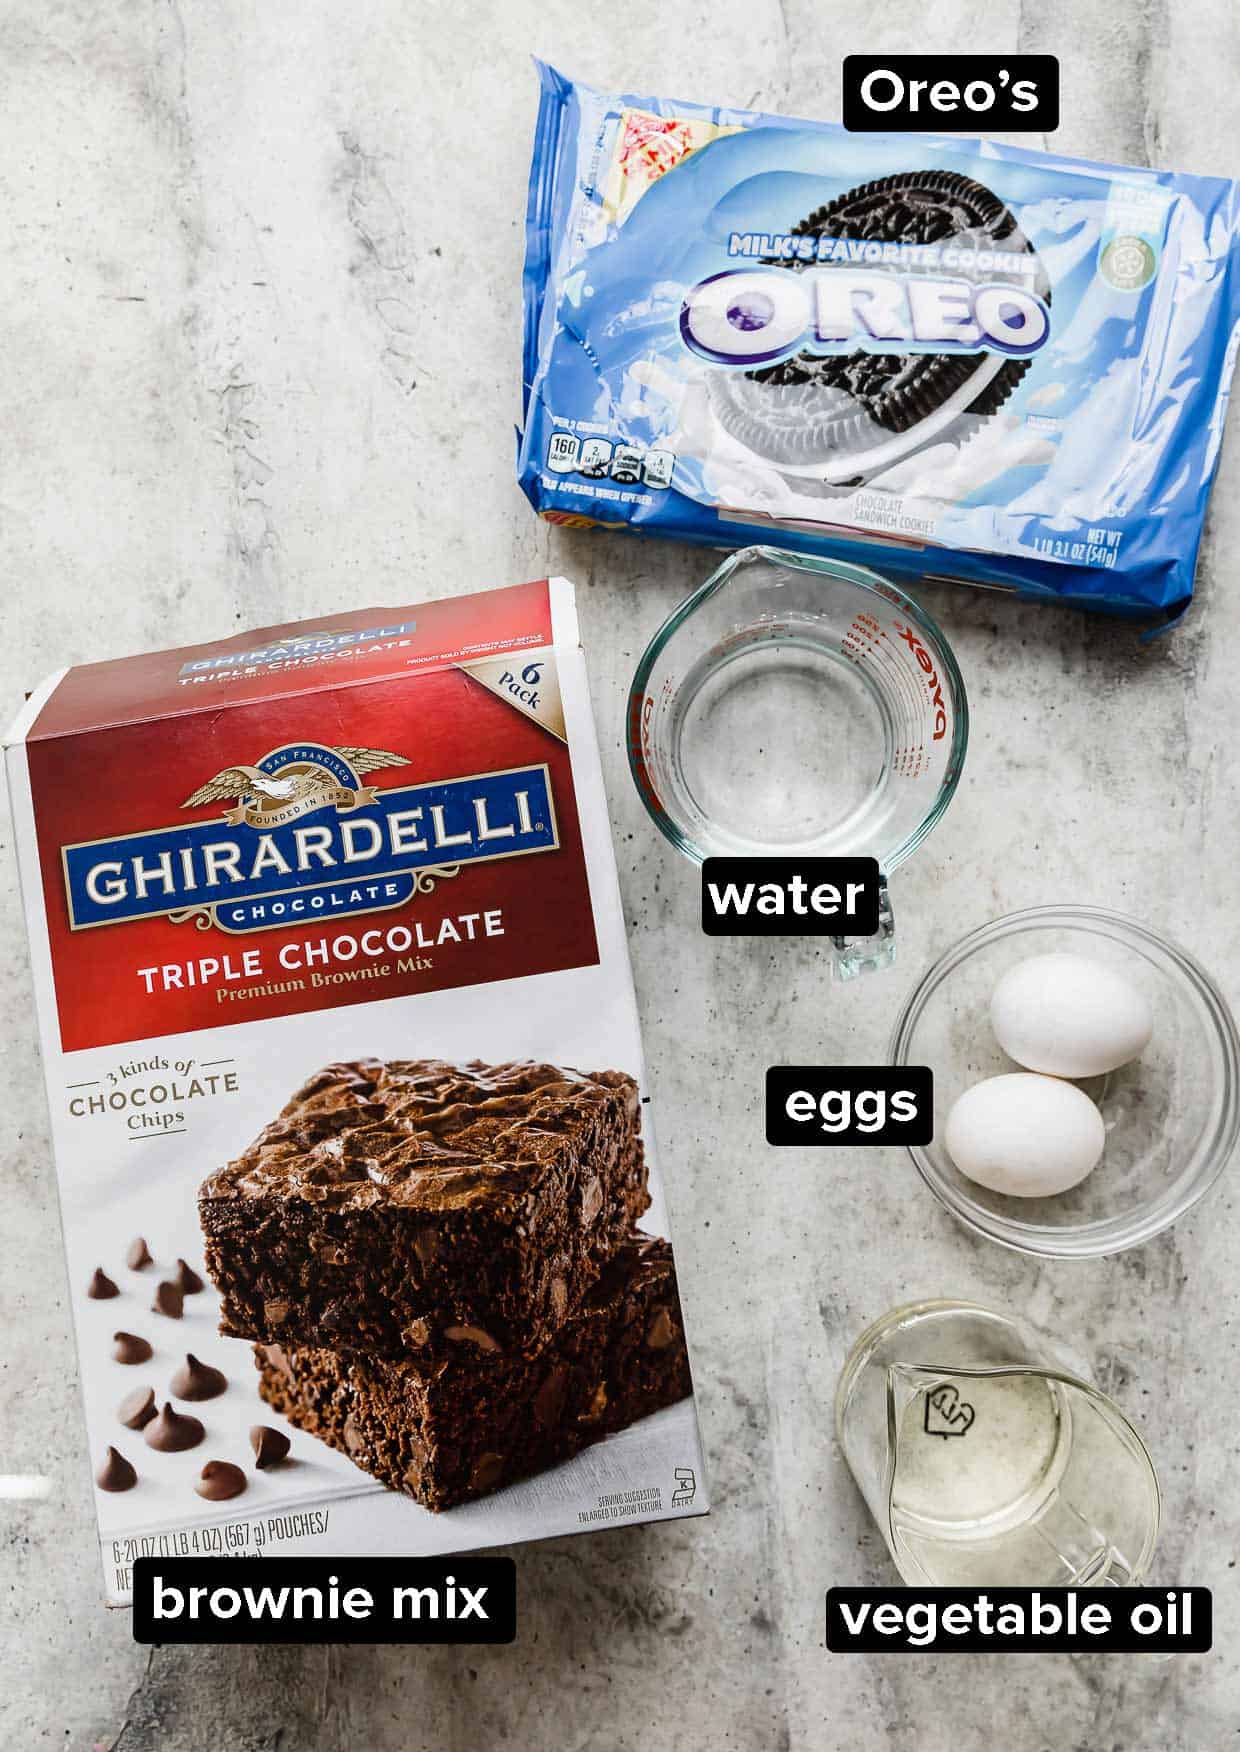 Ingredients used to make Oreo brownies on a gray background: boxed brownie mix, Oreos, water, eggs, vegetable oil.